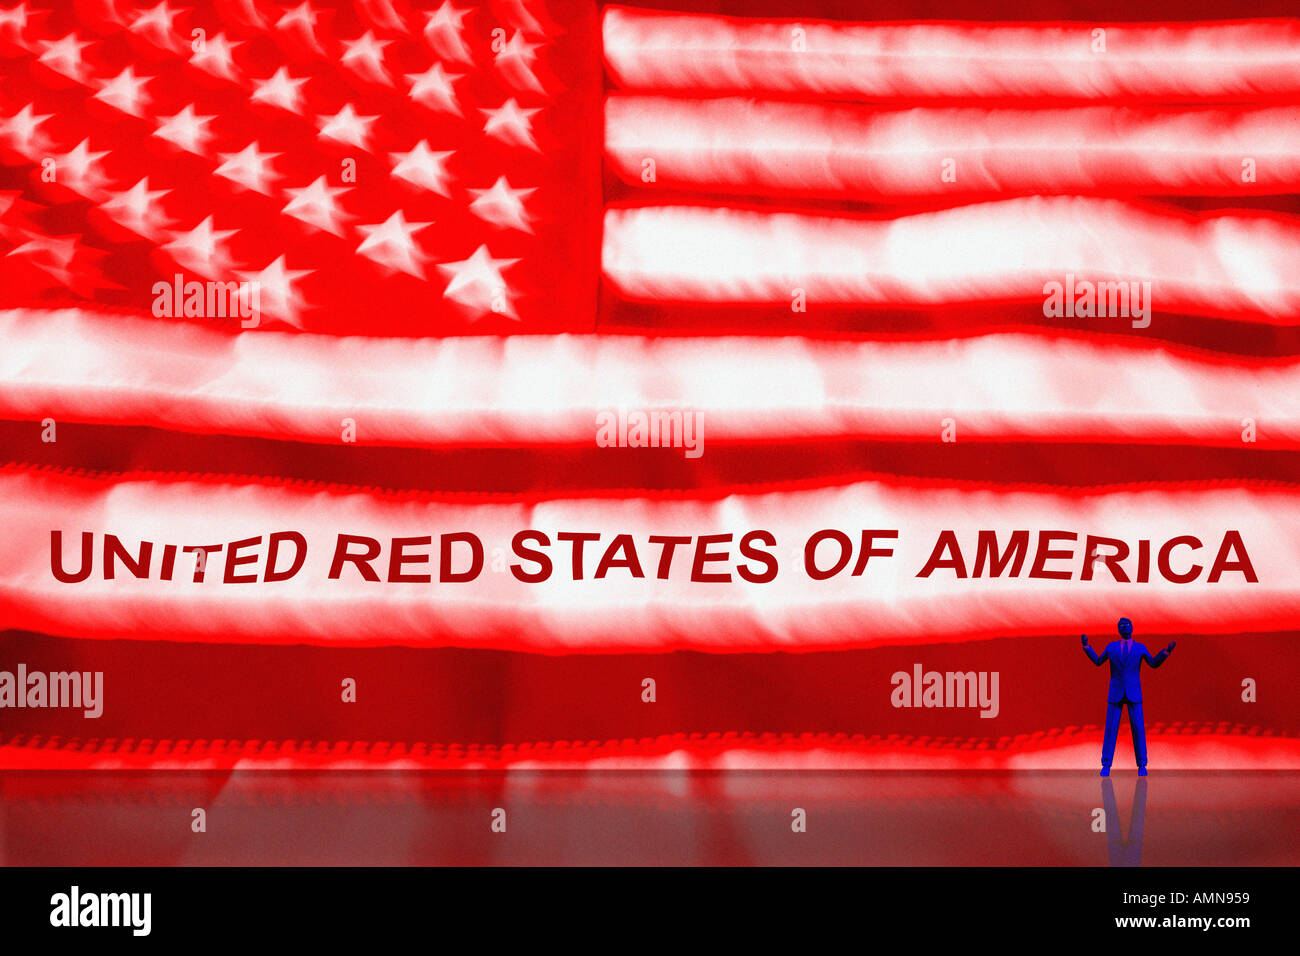 United Red States of America Stock Photo